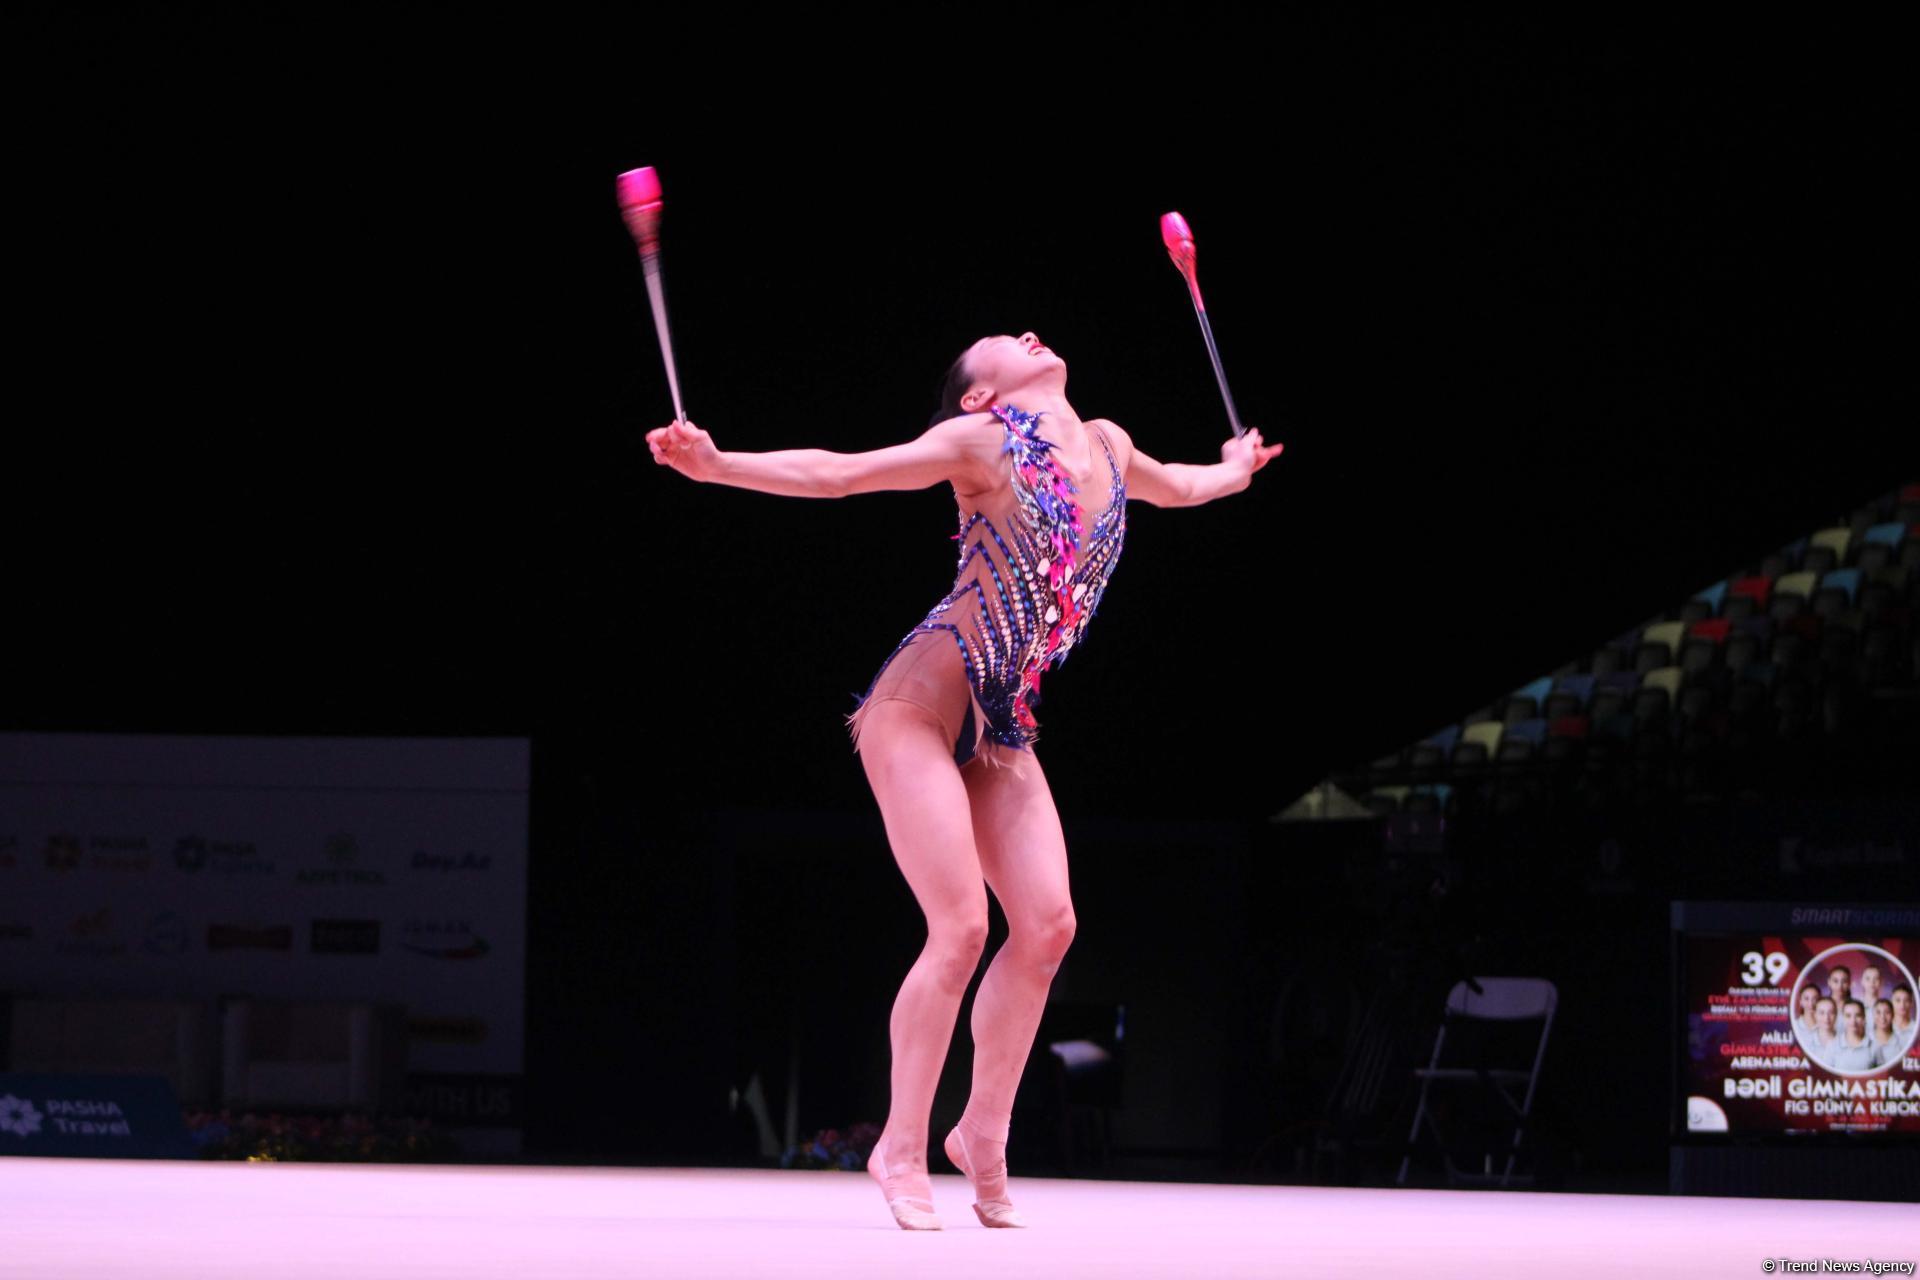 Finalists announced for FIG Rhythmic Gymnastics World Cup in Baku in clubs exercises